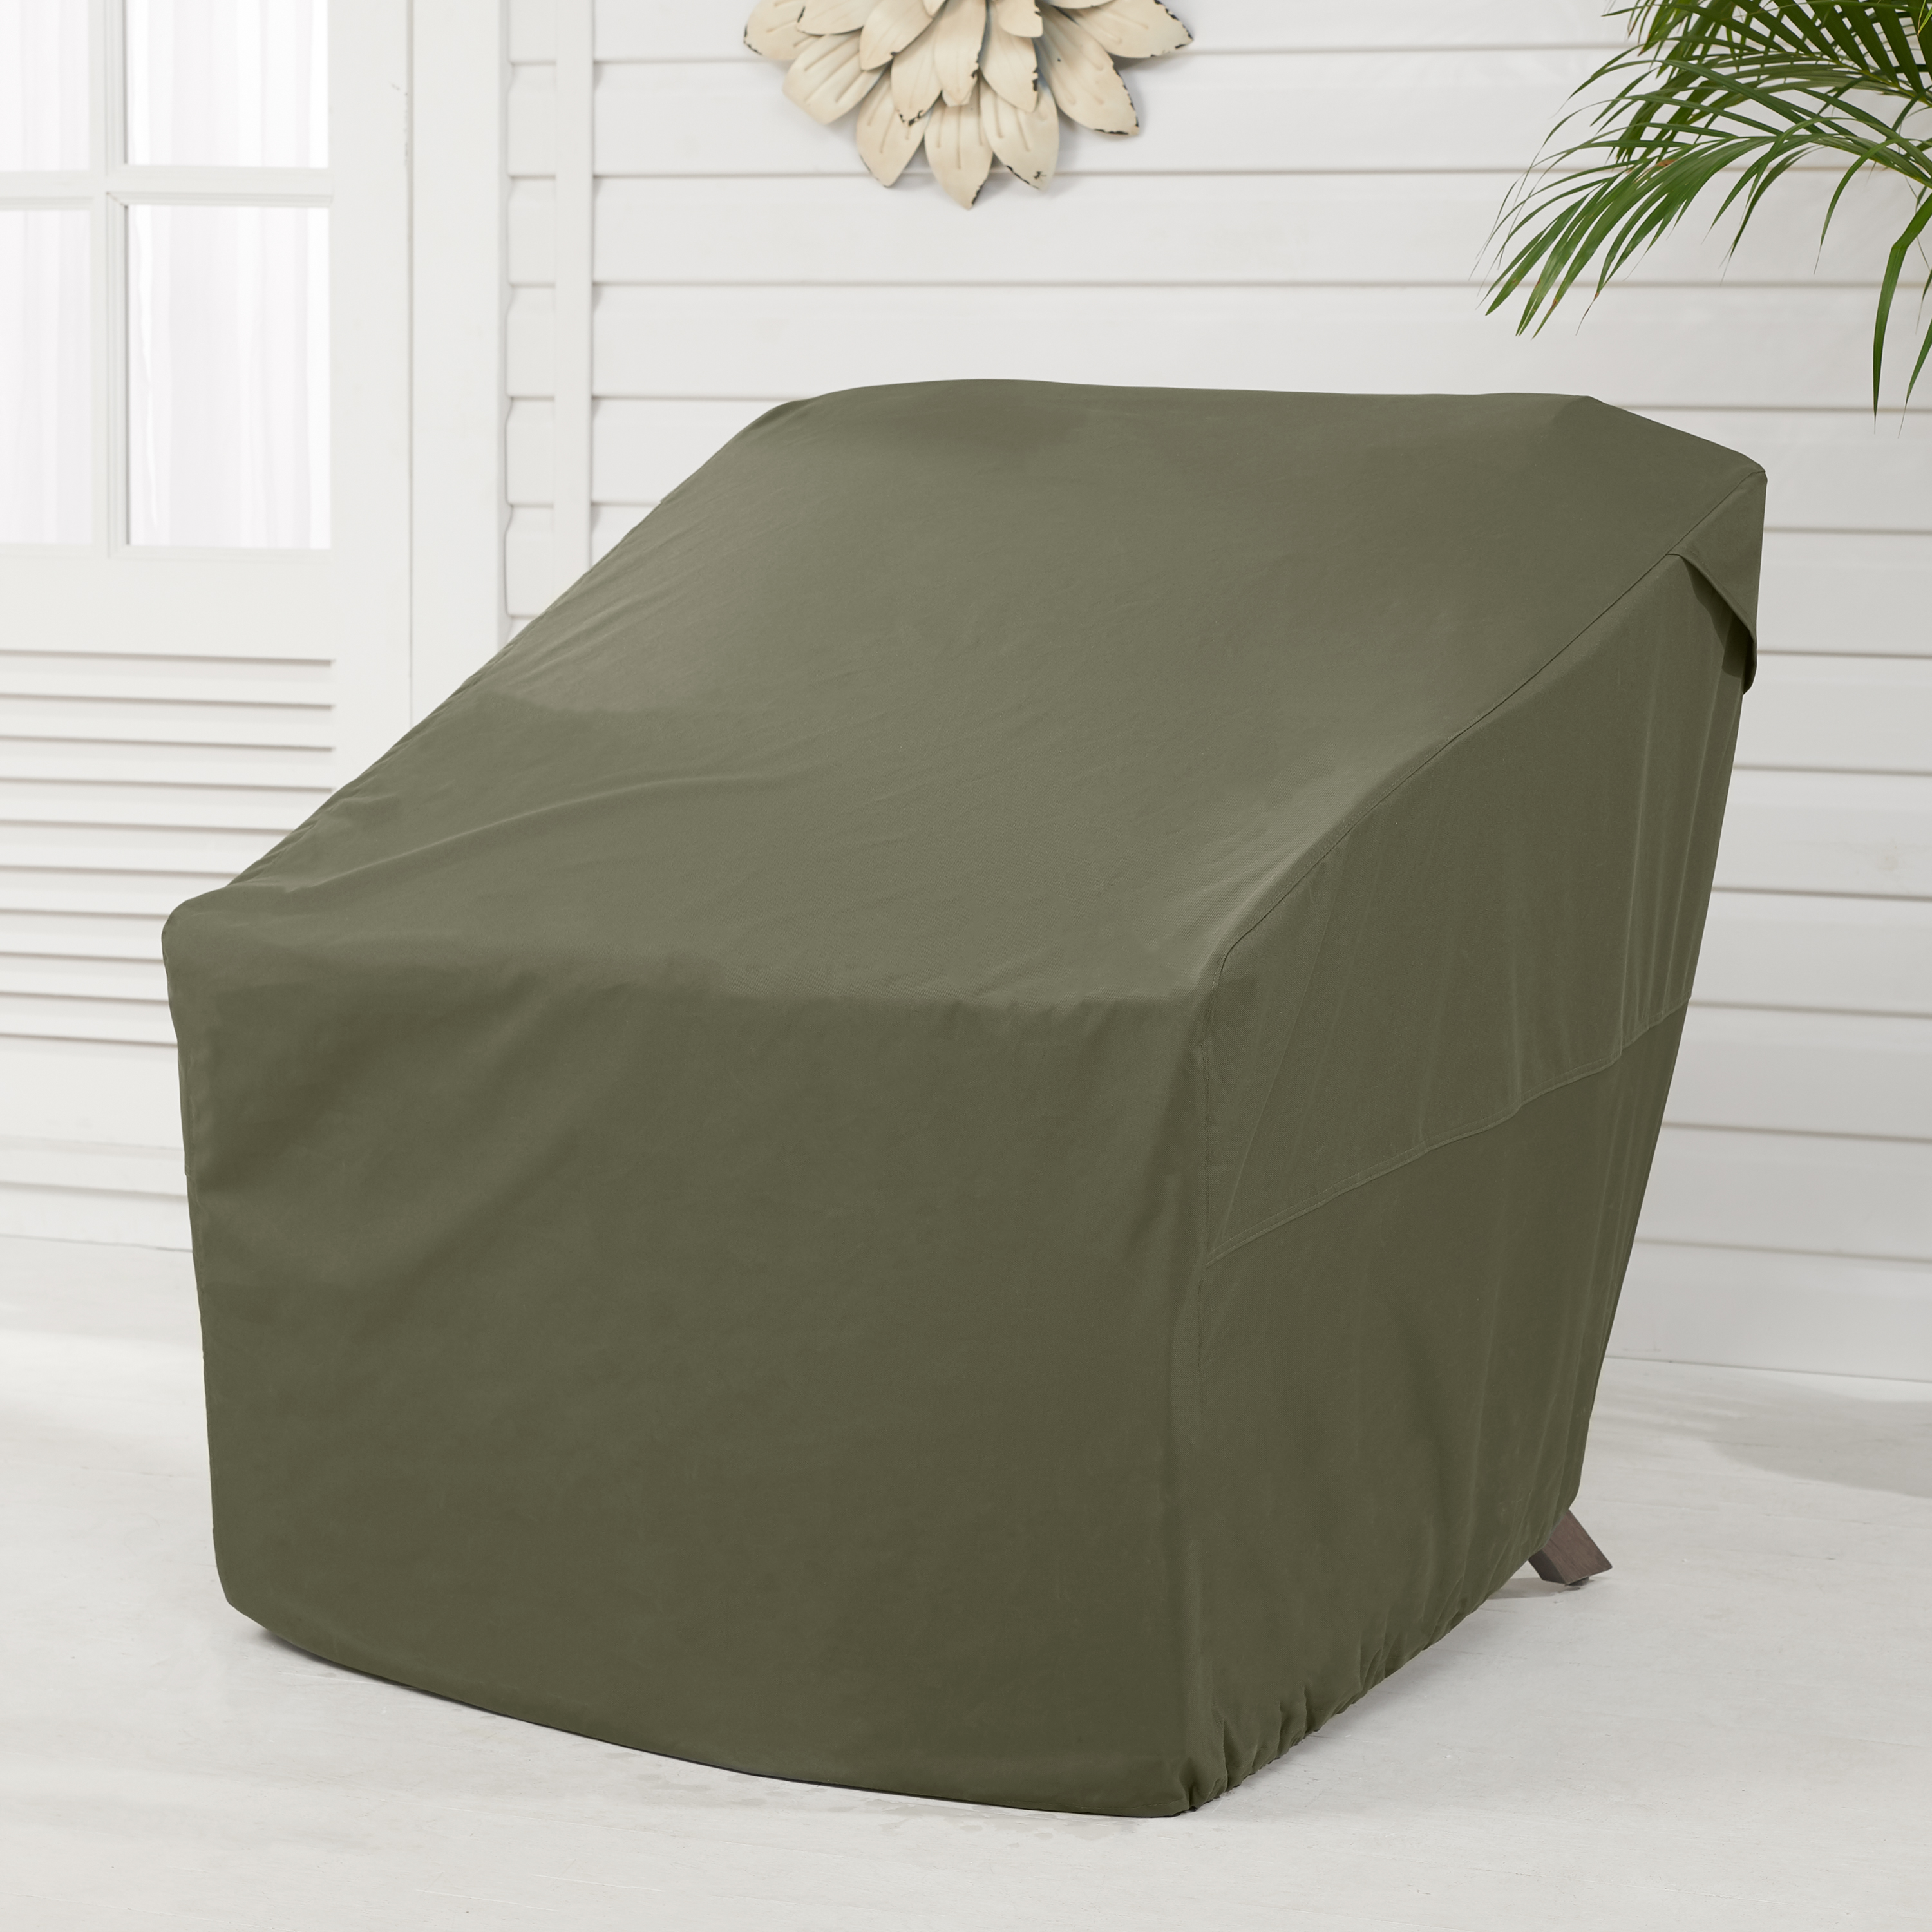 Better Homes & Gardens 33.5" x 31.5" x 36" Olive Gray Rectangle Patio Chair Cover - image 4 of 5